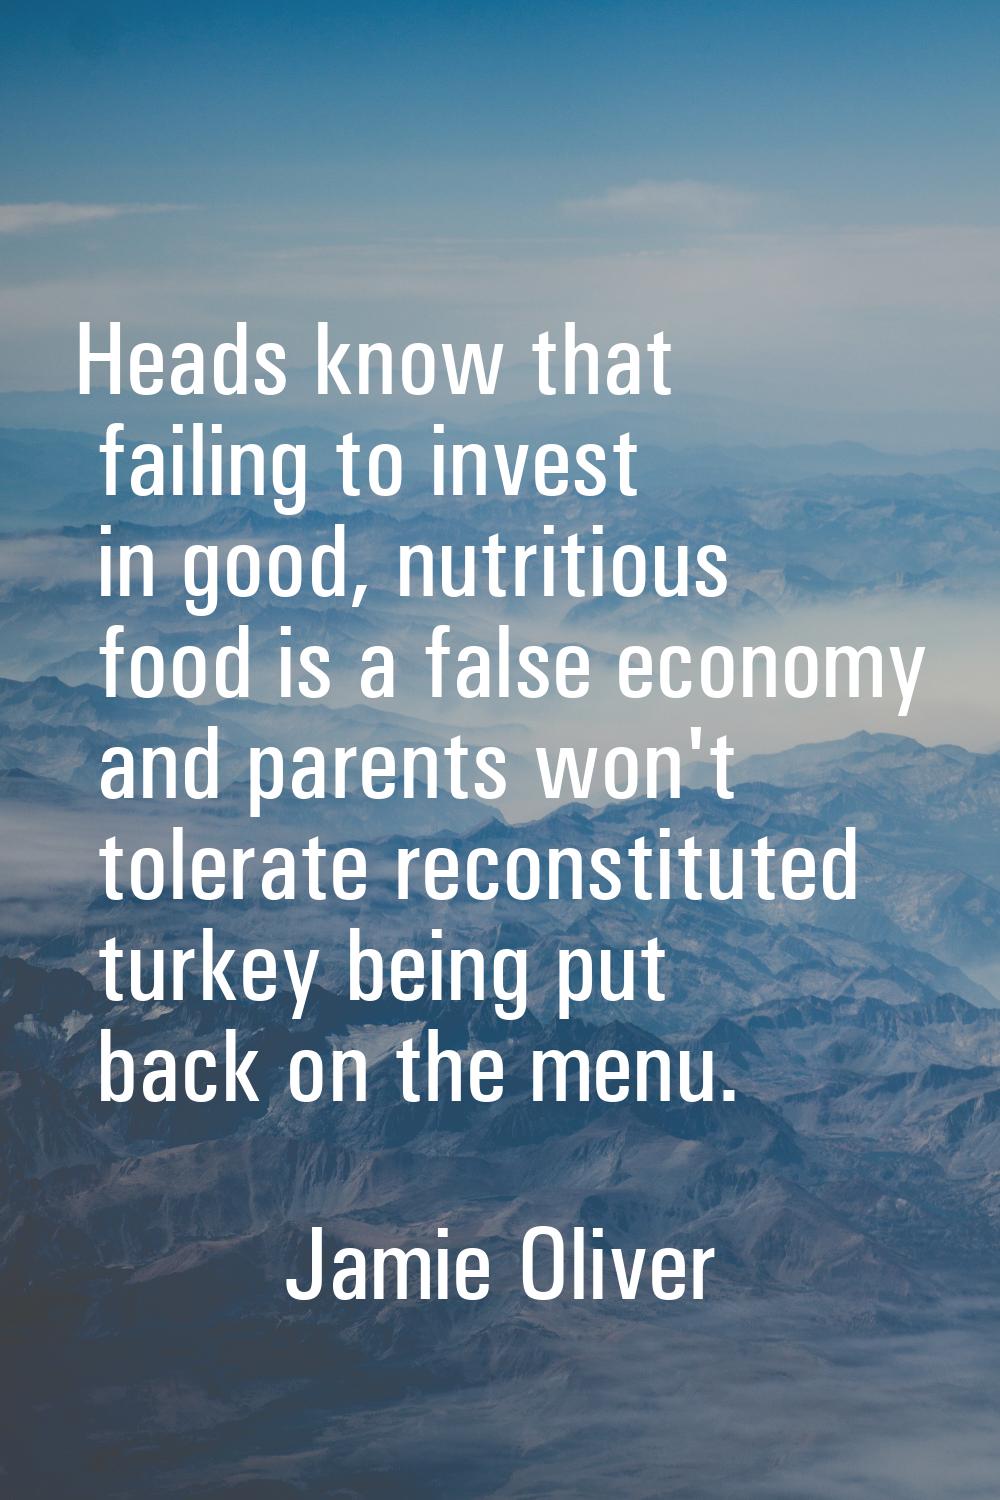 Heads know that failing to invest in good, nutritious food is a false economy and parents won't tol